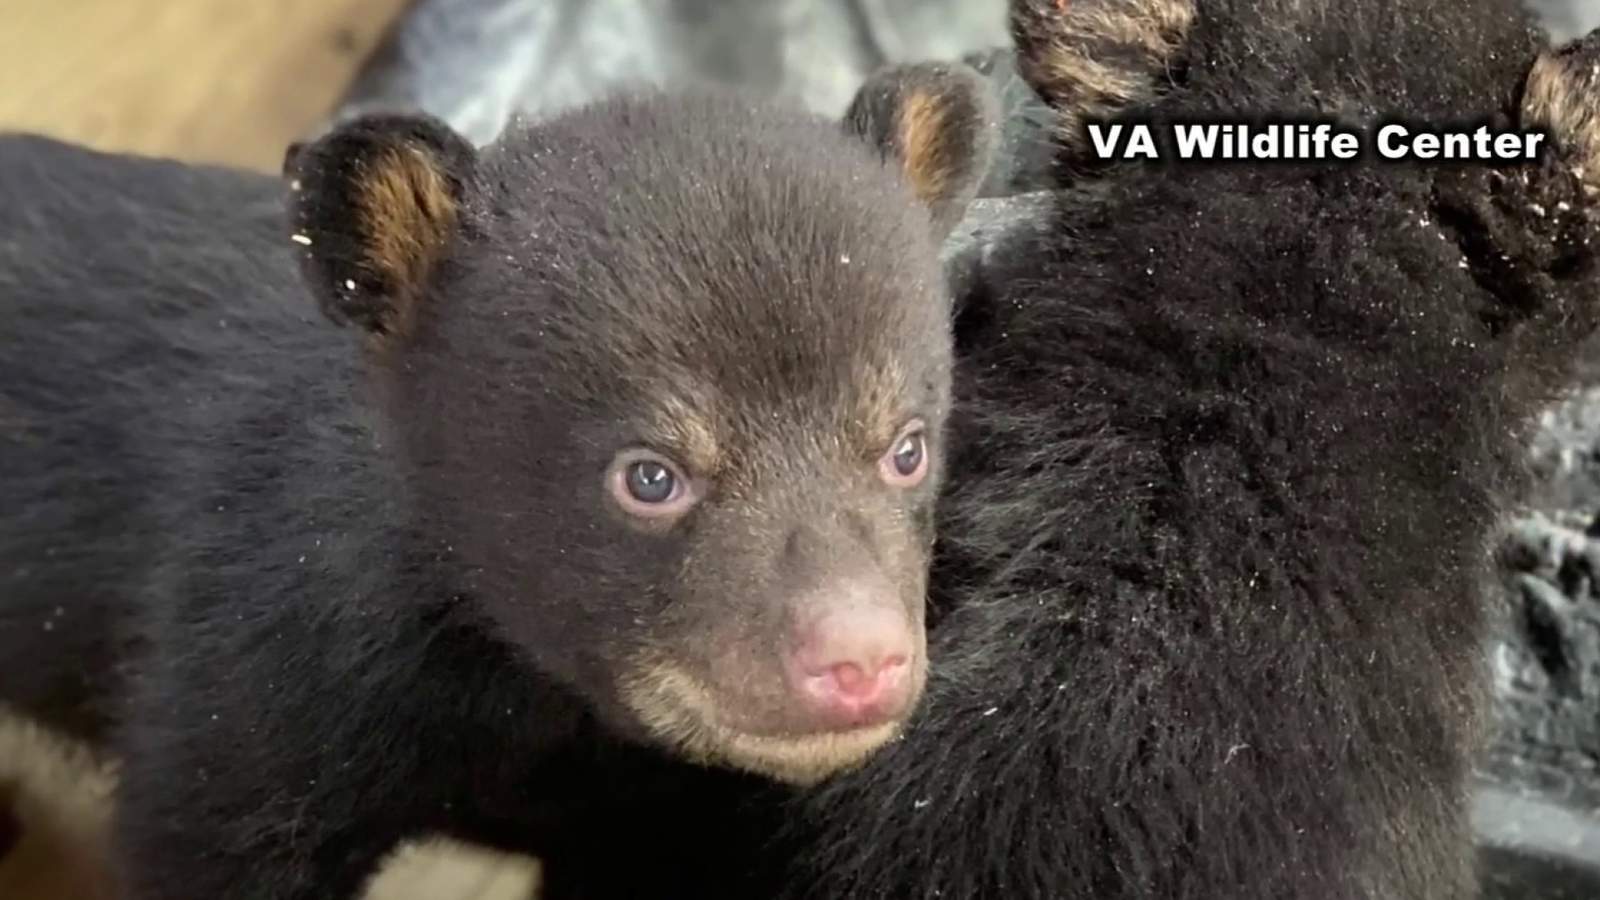 Virginia wildlife center asking for donations to feed 19 rescued black bear cubs